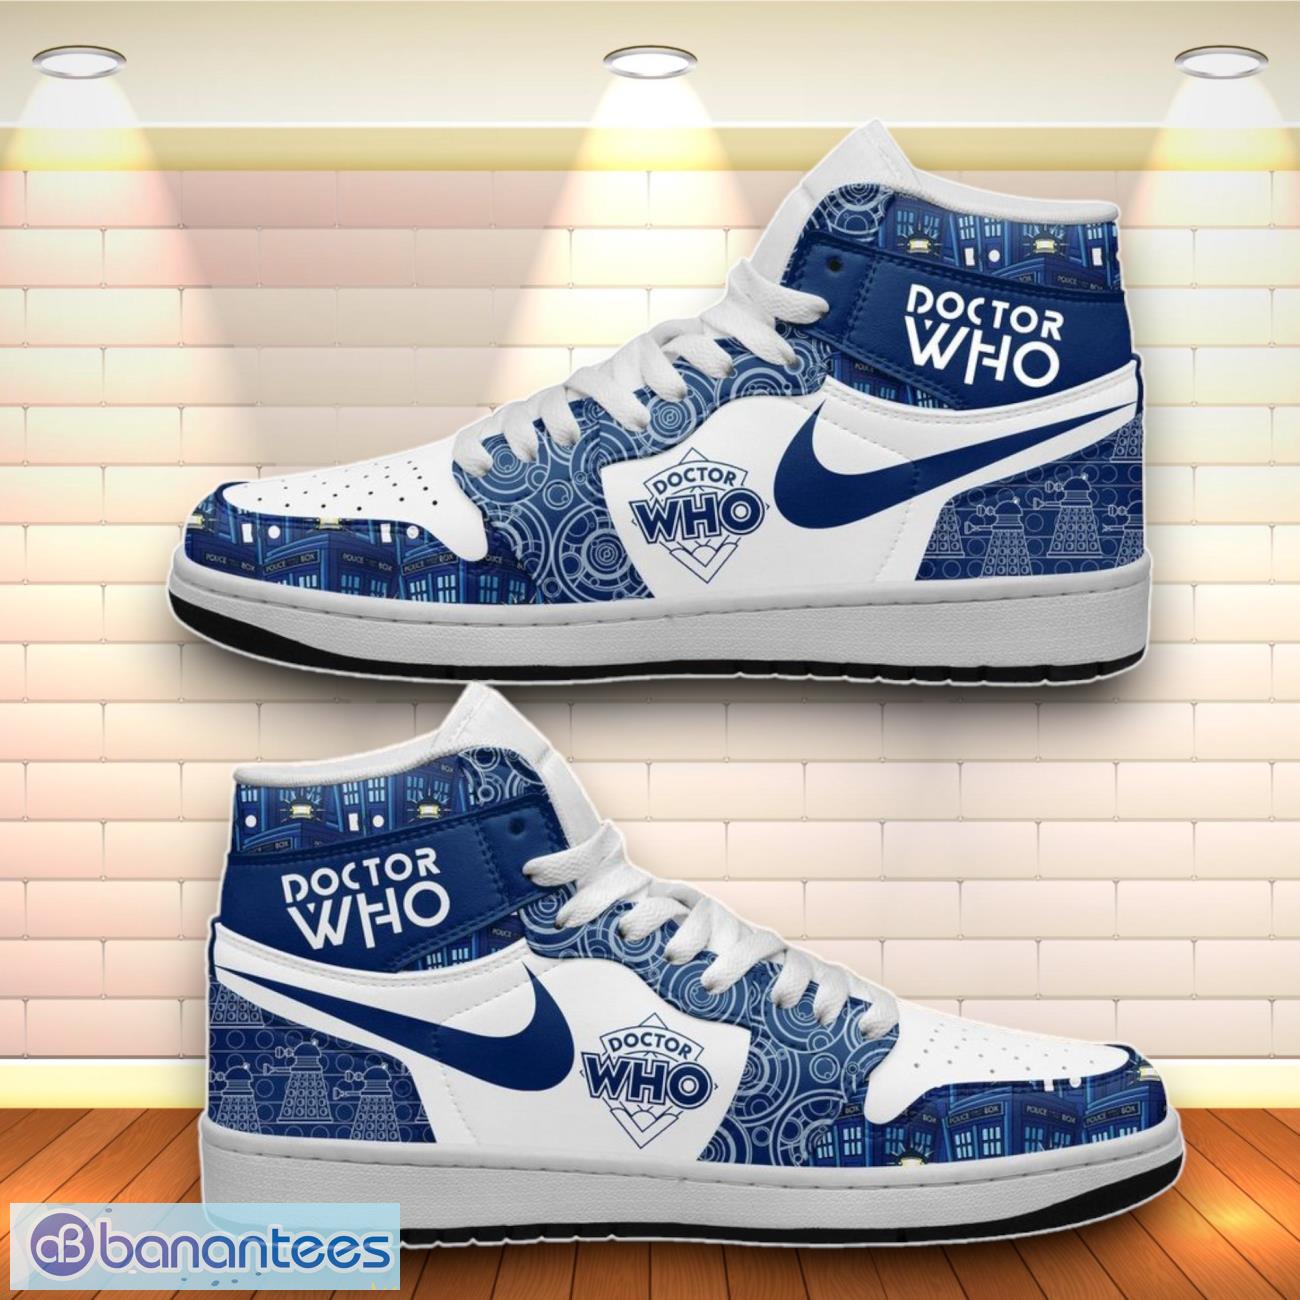 Doctor Who Air Jordan High Top Shoes Product Photo 1